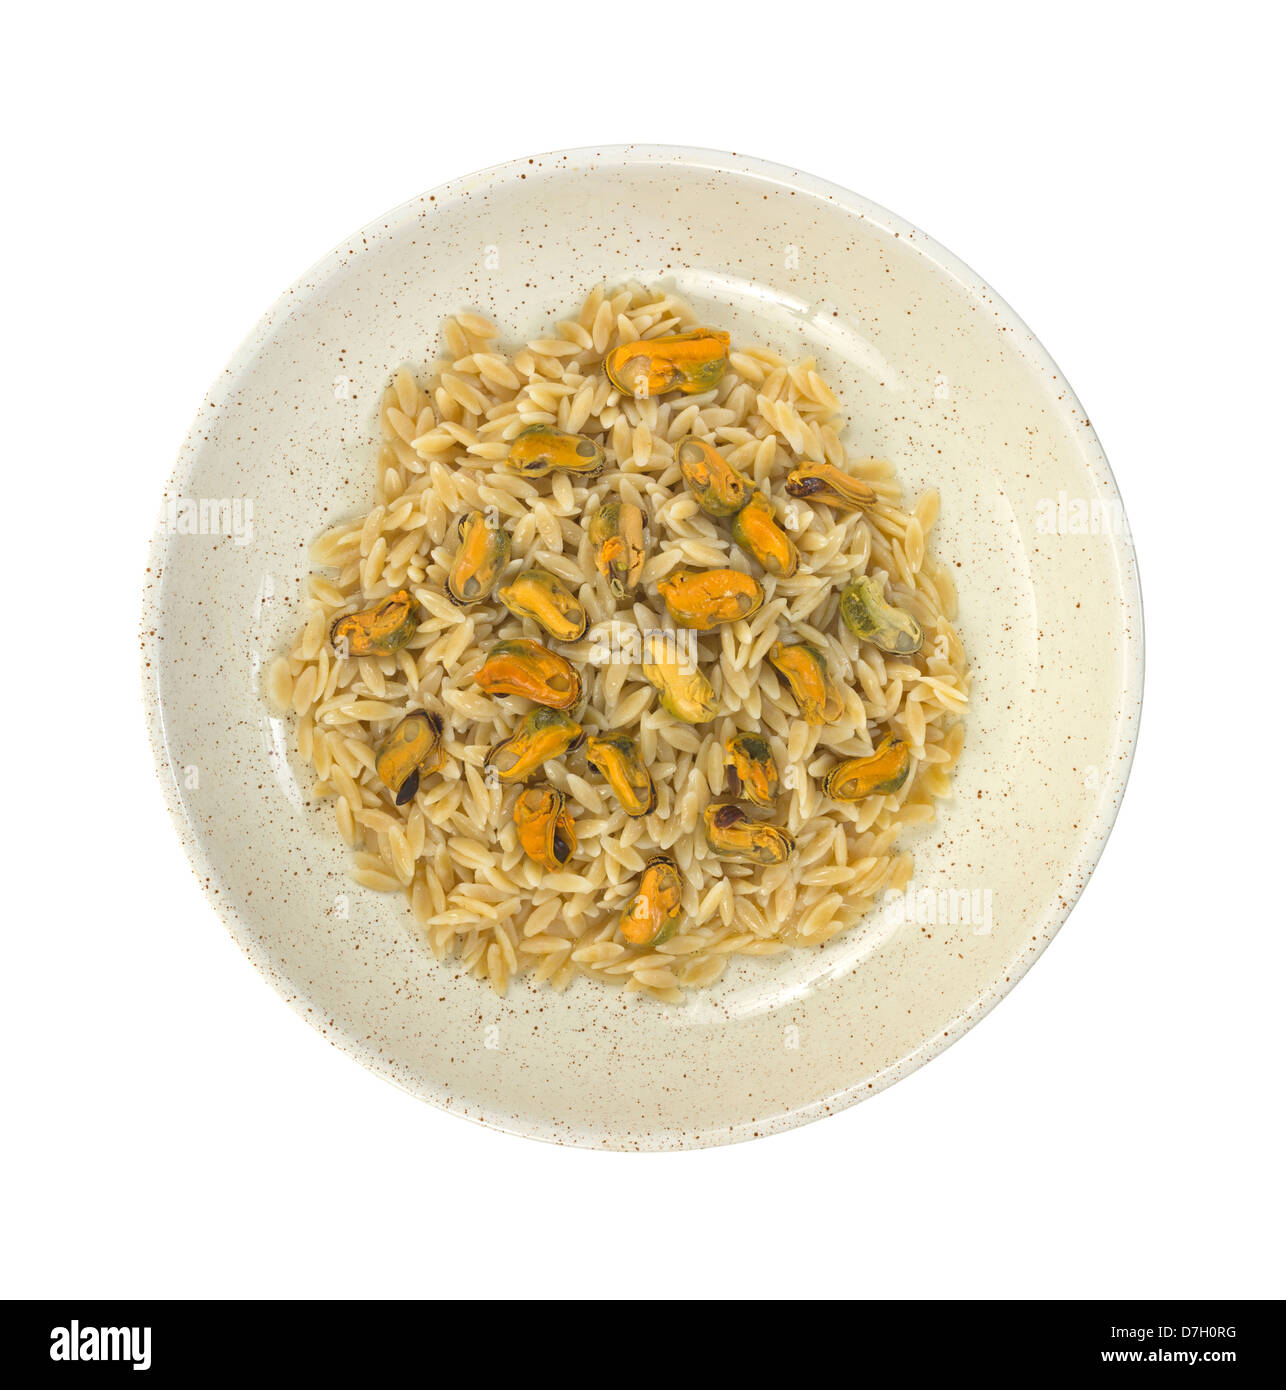 Top view of a serving of orzo topped with marinated mussels in shallow bowl on a white background. Stock Photo